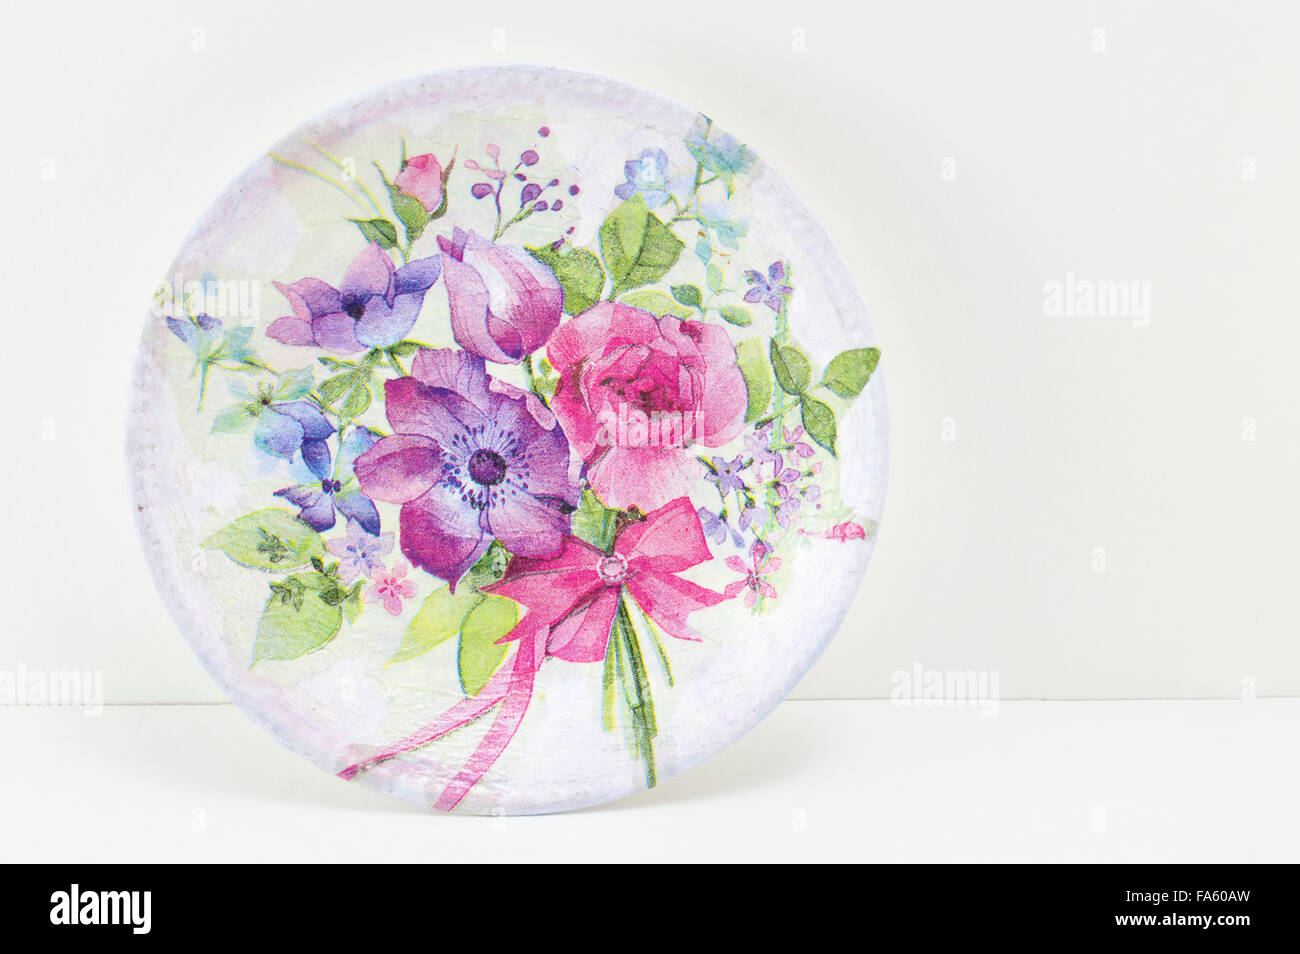 Decoupage decorated plate with flower pattern against white wooden background Stock Photo